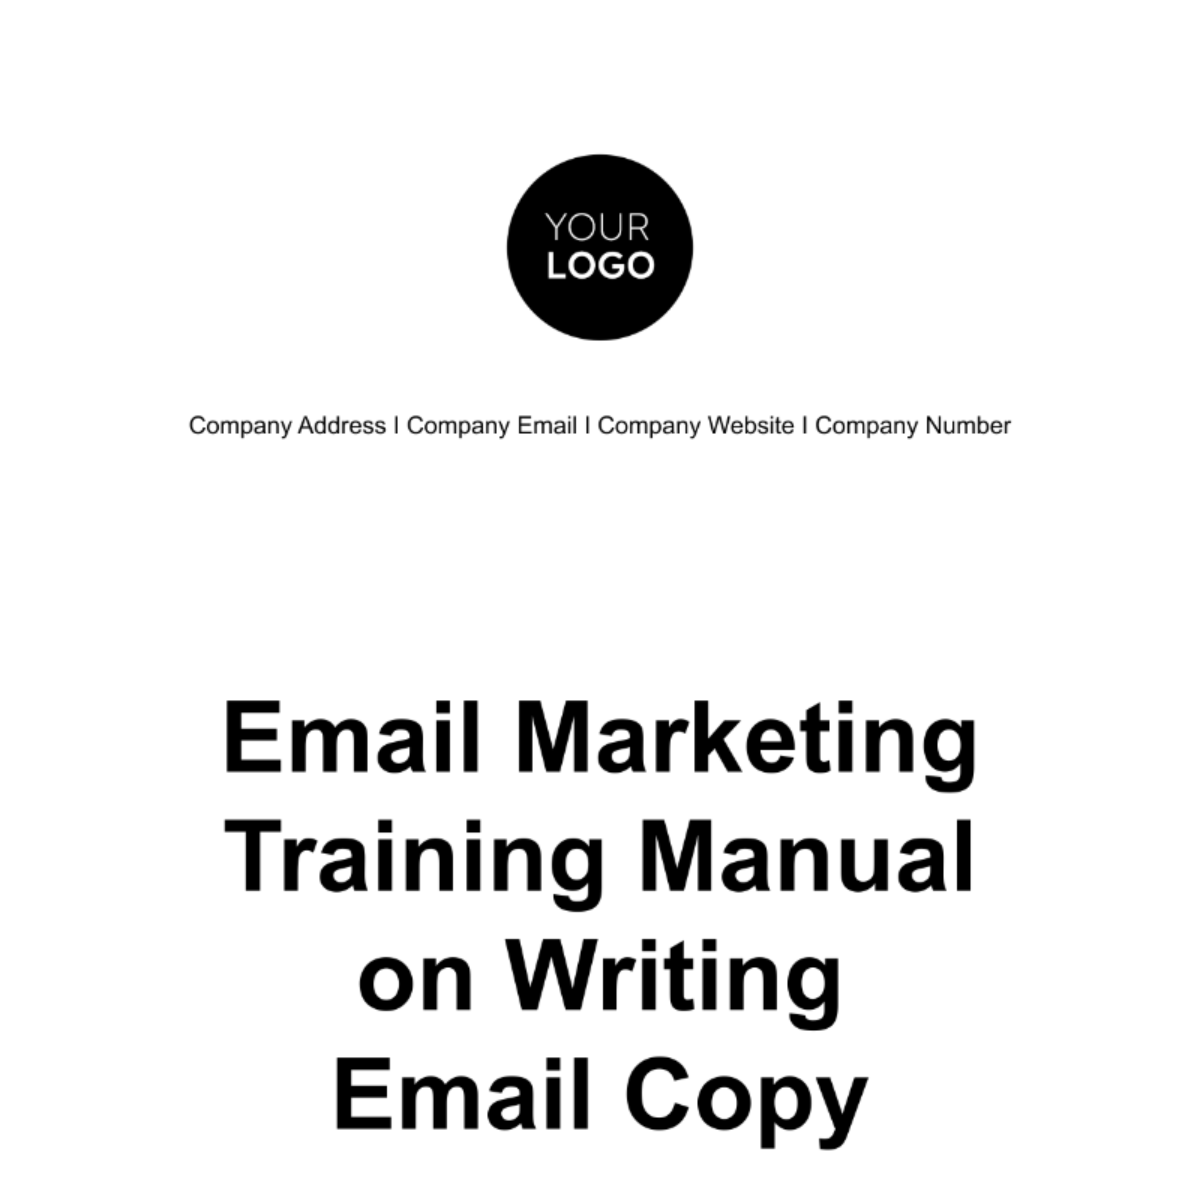 Free Email Marketing Training Manual on Writing Email Copy Template